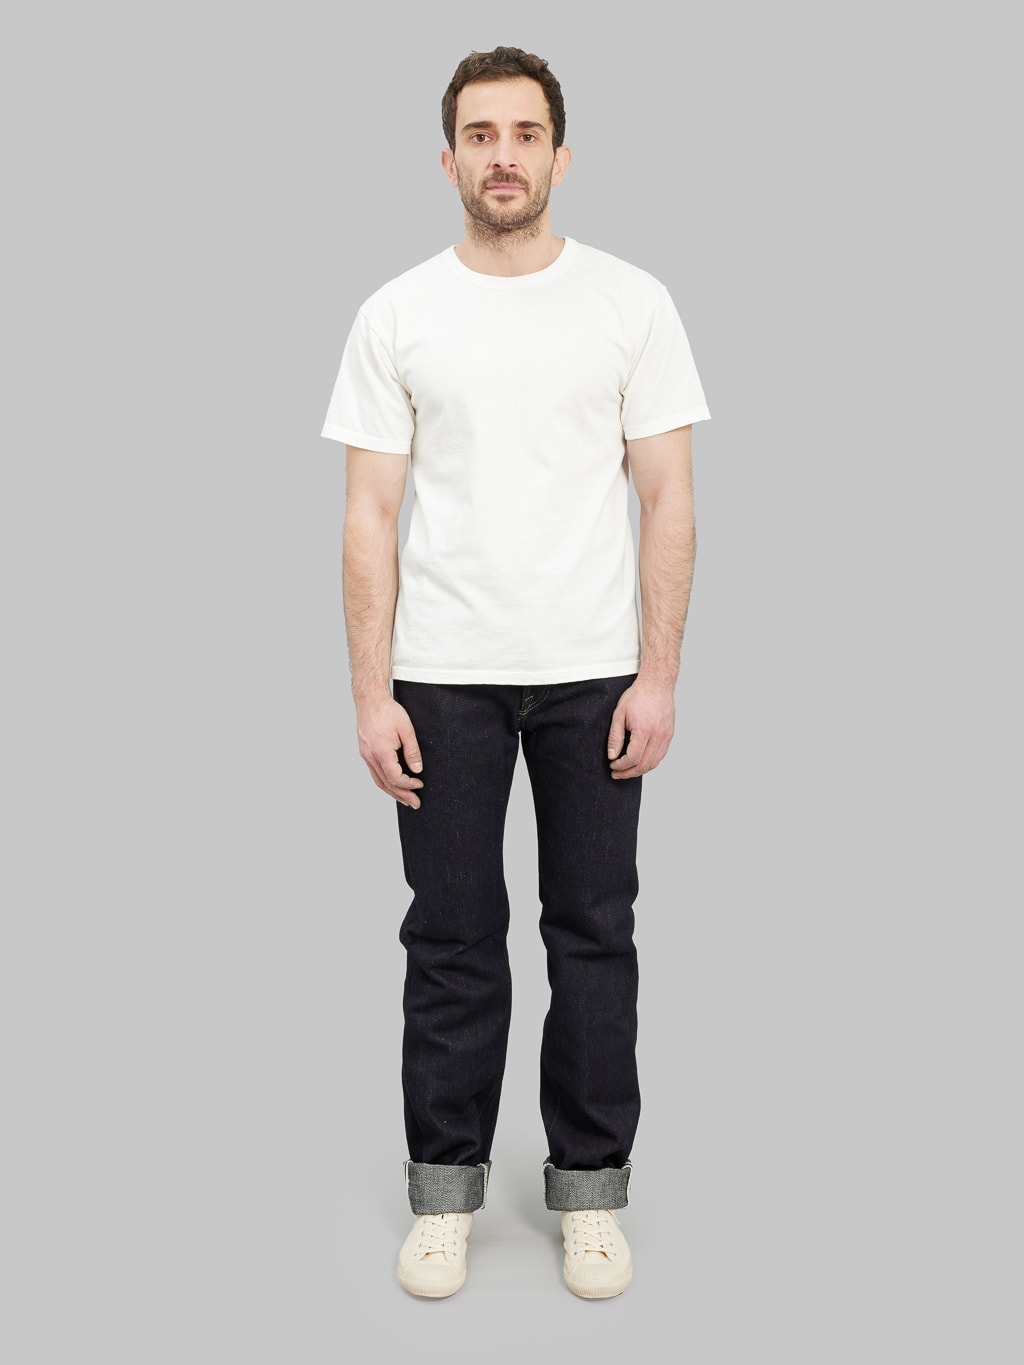 The Strike Gold Extra Heavyweight regular straight jeans front fit